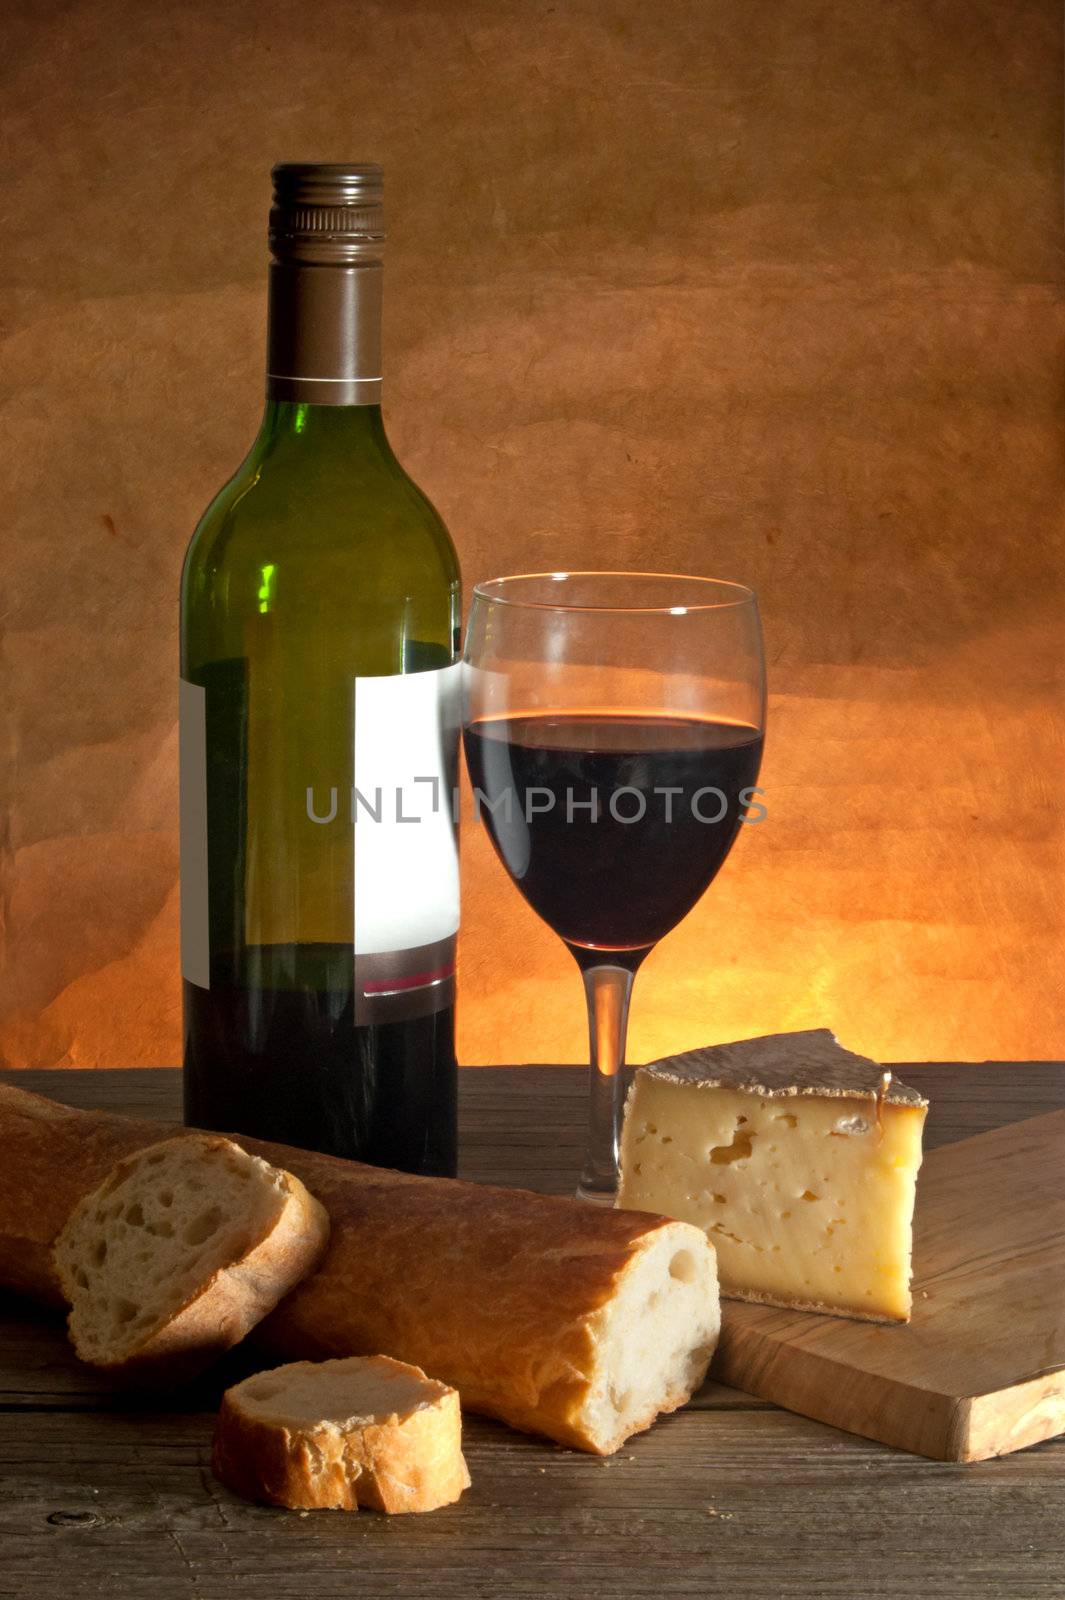 Cheese and wine by unikpix